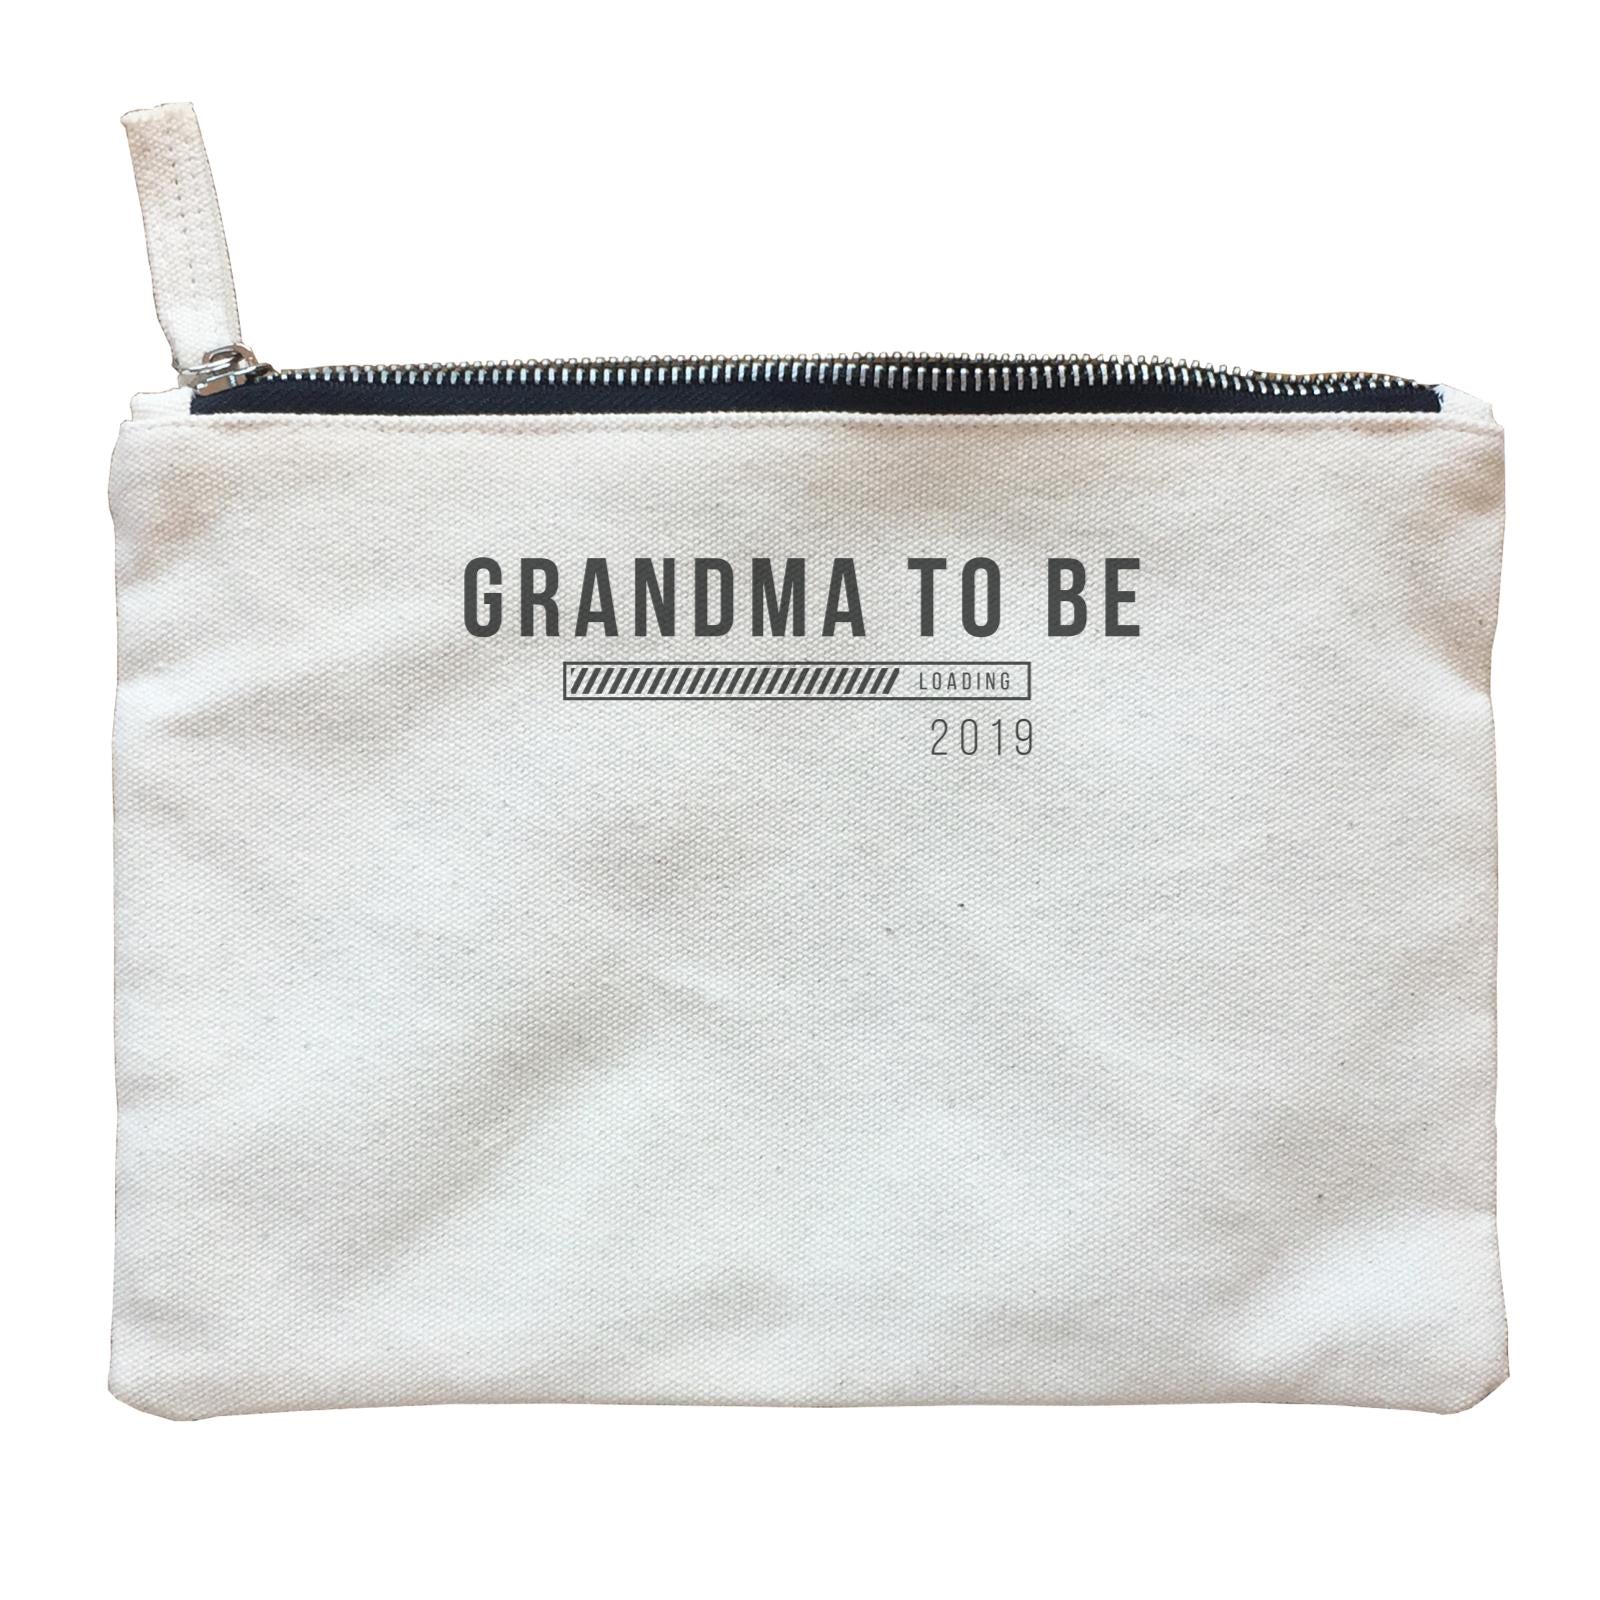 Coming Soon Family Grandma To Be Loading Add Date Zipper Pouch